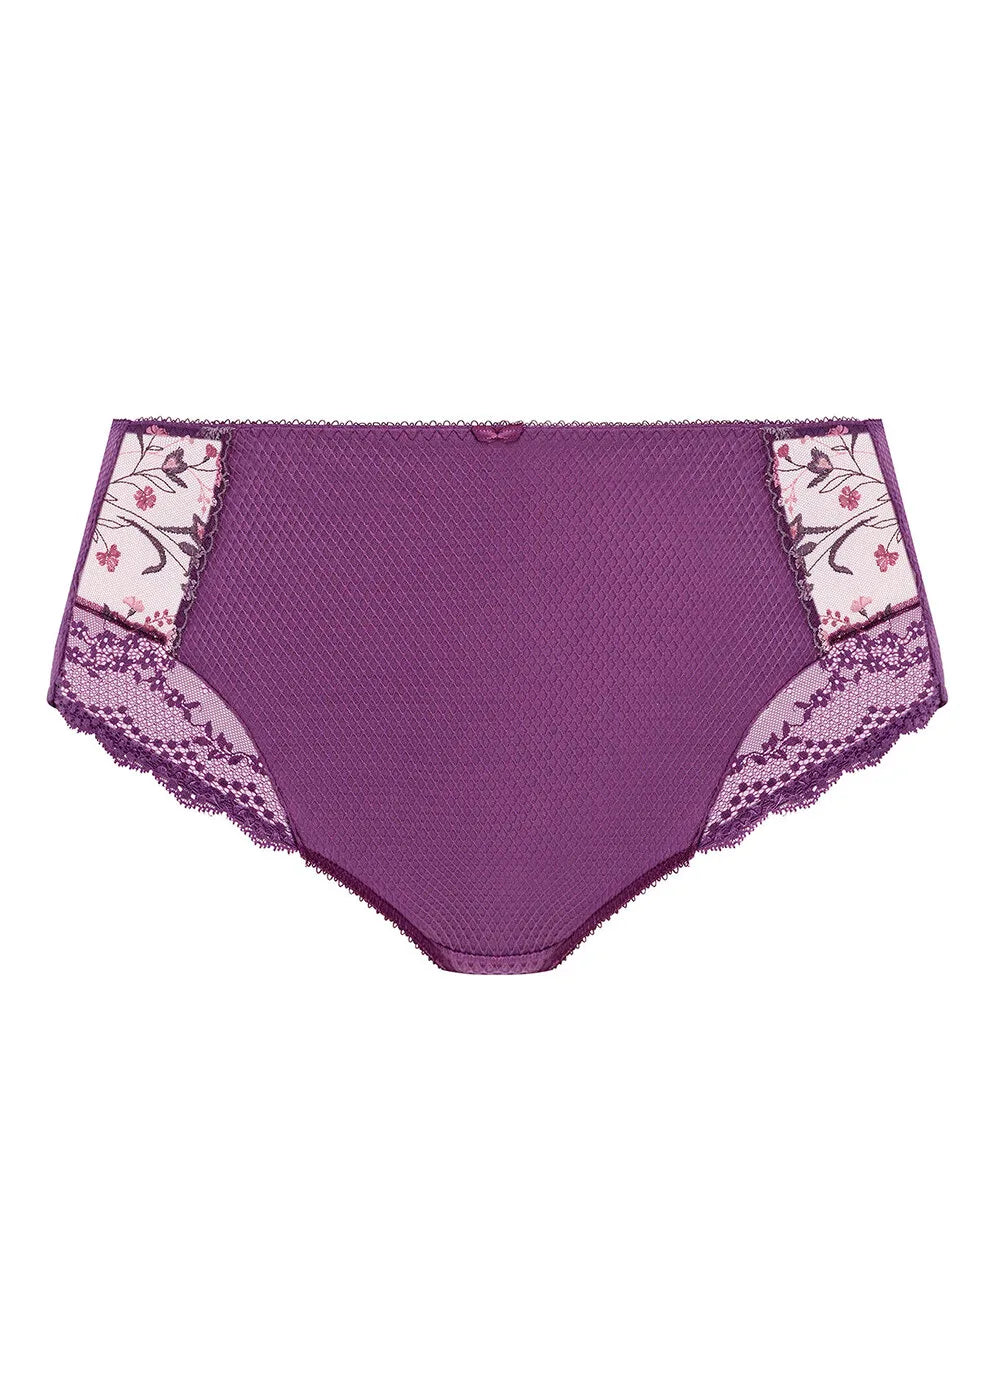 CHARLEY Full Brief from Elomi at Belle Lacet Lingerie.